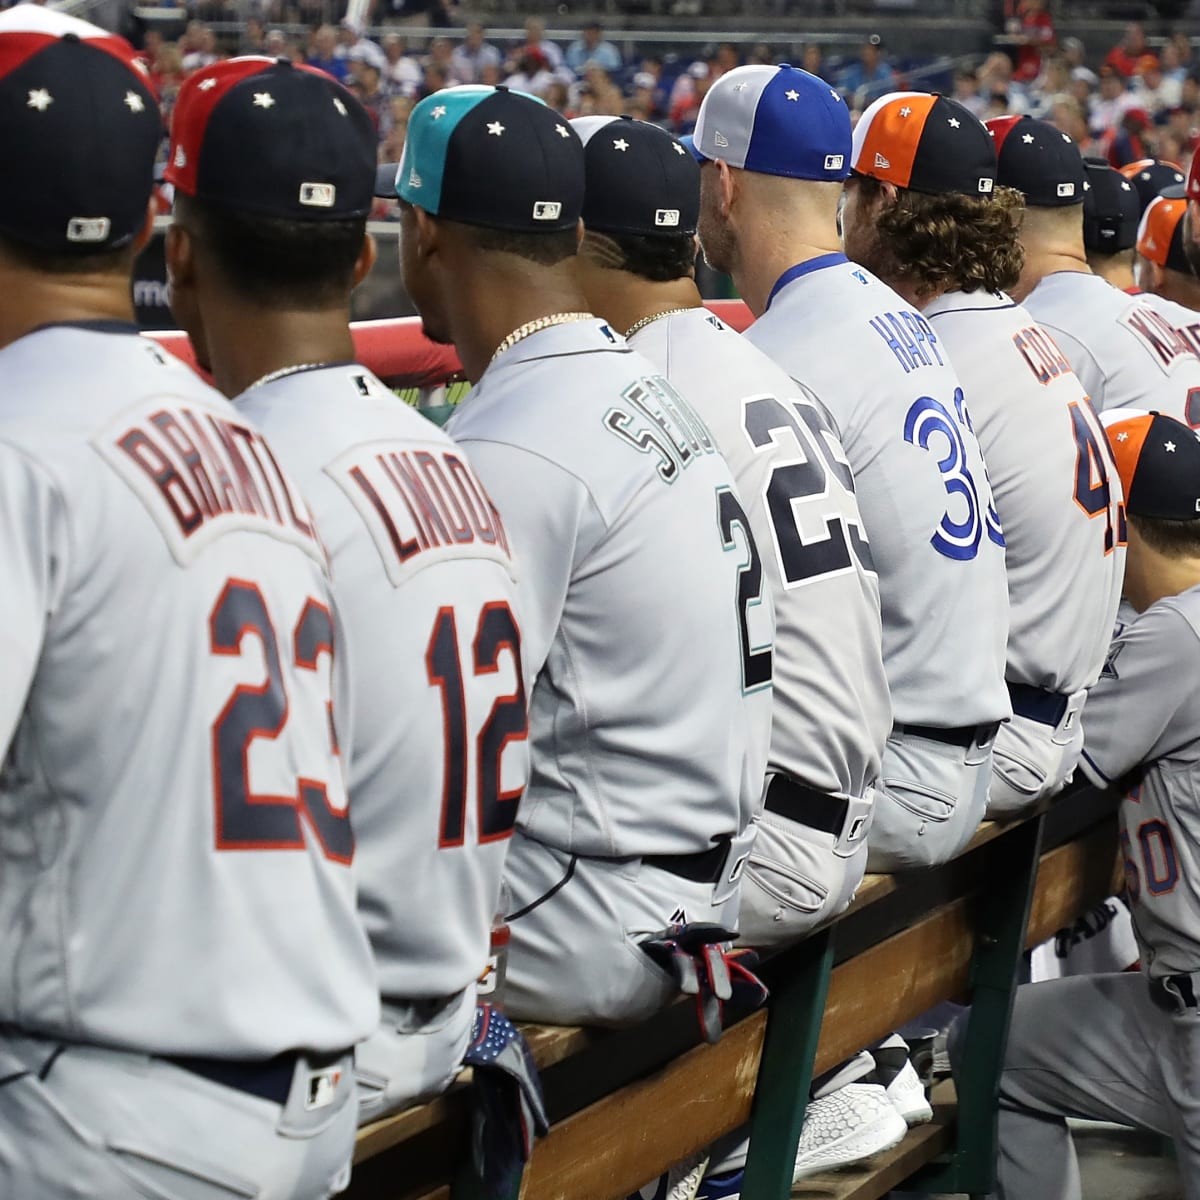 Detroit Tigers Snub & So Many Other Wrongs at the All Star Game